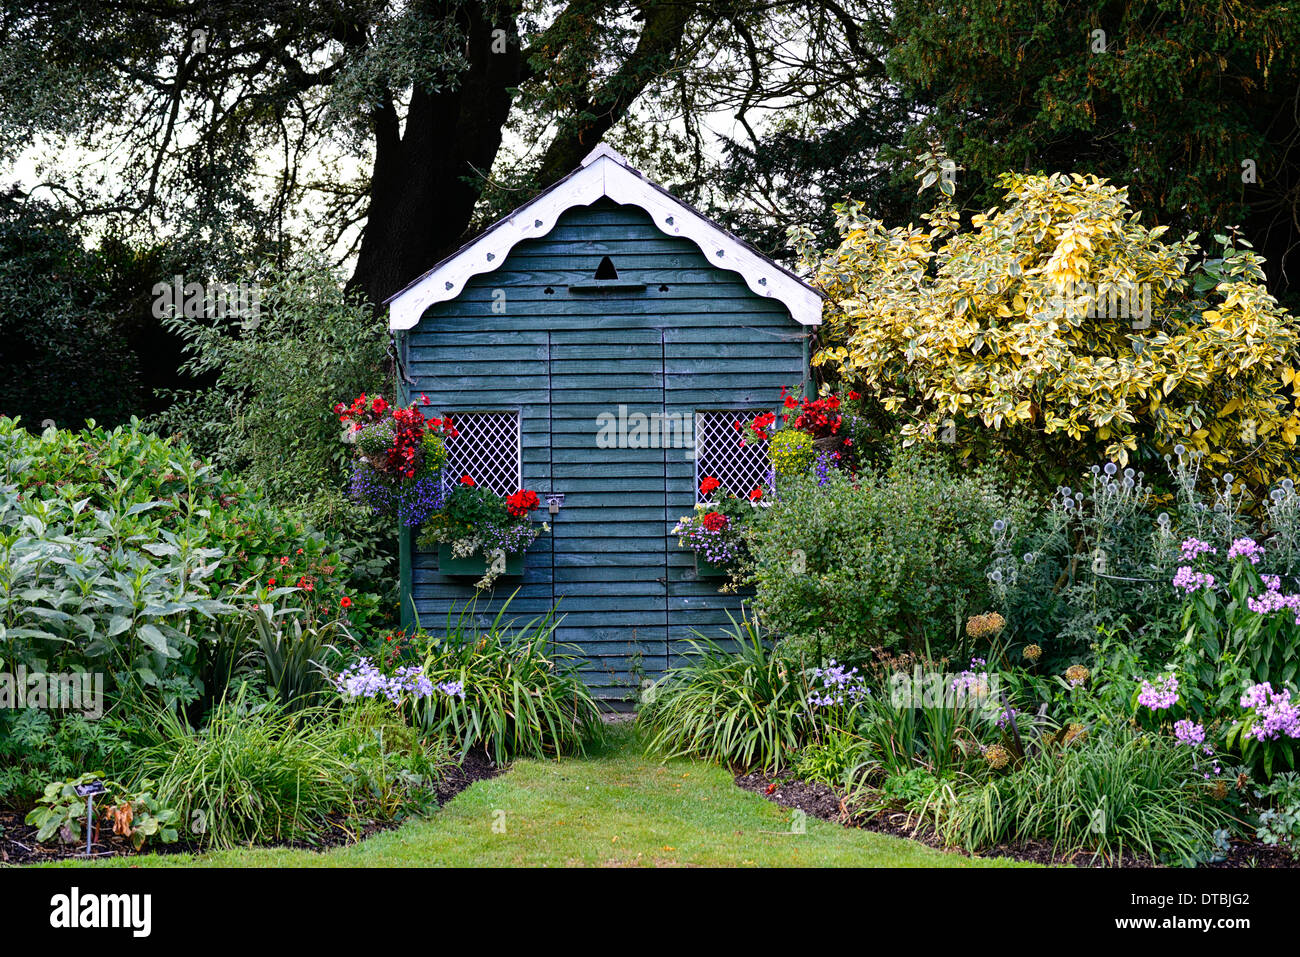 altamont gardens garden shed mix mixed planting scheme perennial bed border beds borders Stock Photo